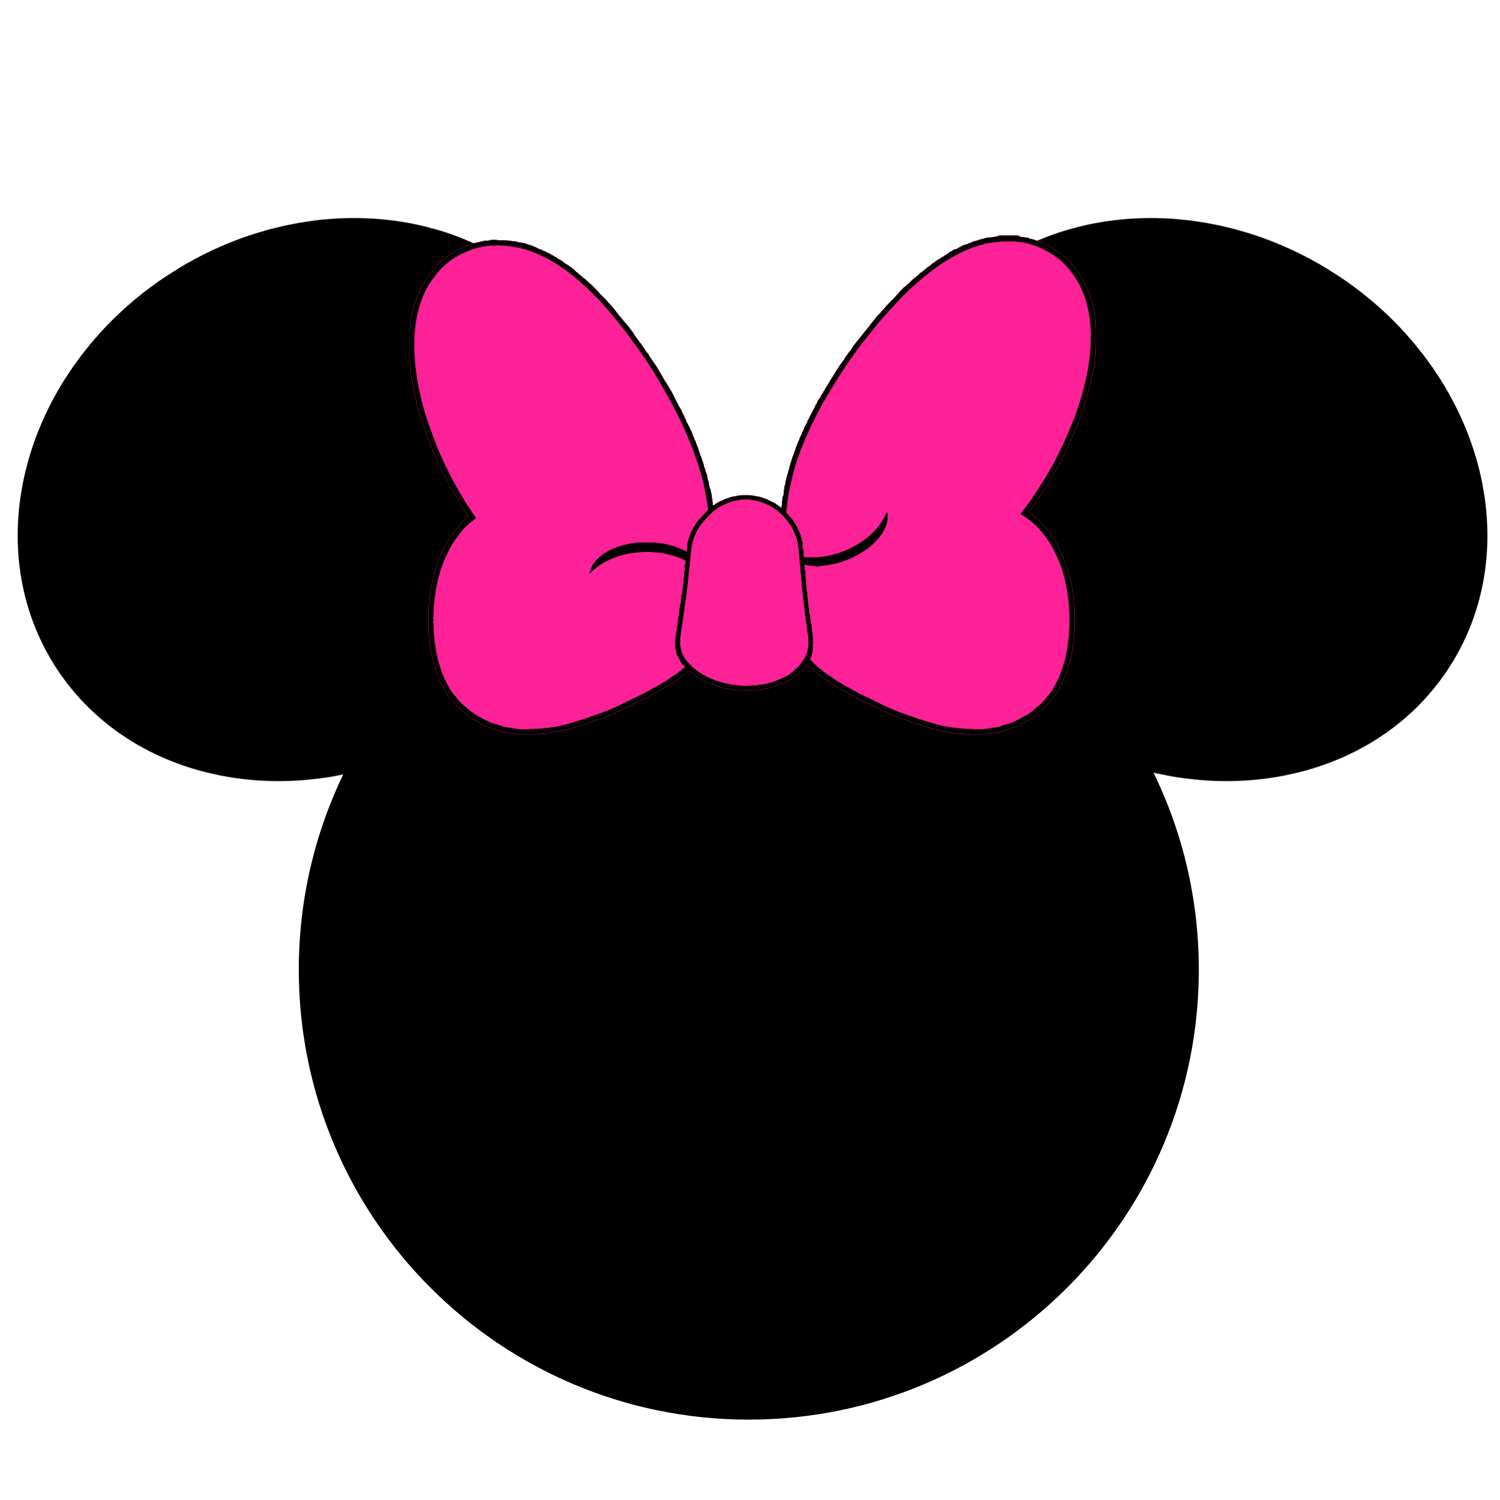 Download Free SVG KBee Creations by LuLu: Felt Applique Minnie Inspired Bow from ...